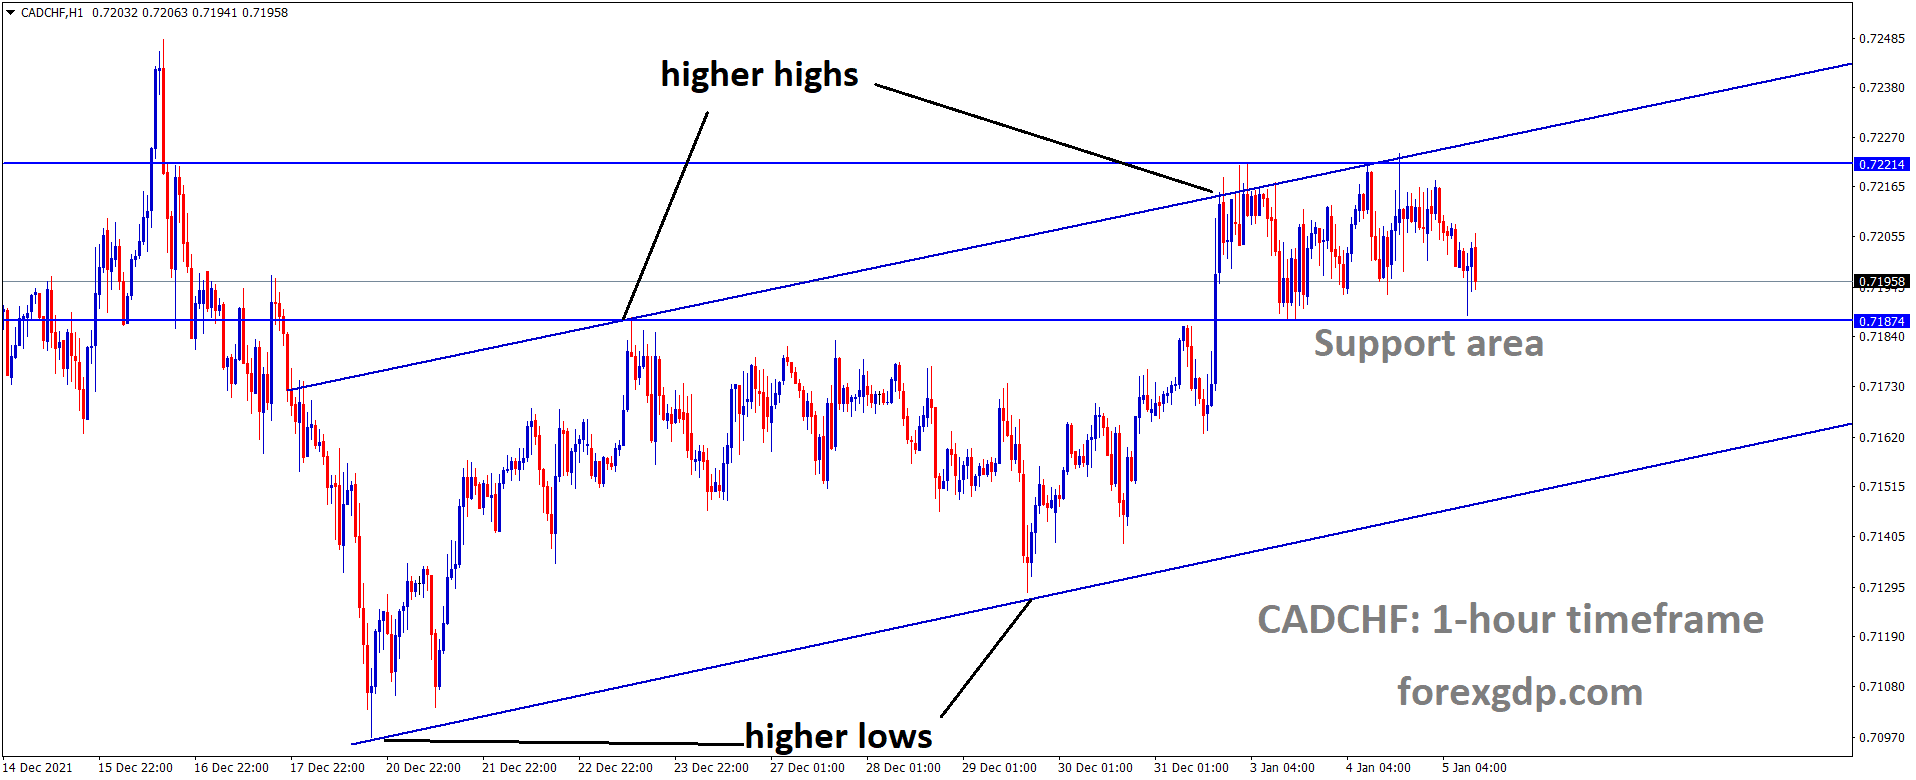 CADCHF is moving in an Ascending channel and the market has rebounded from the Support area of the Box pattern